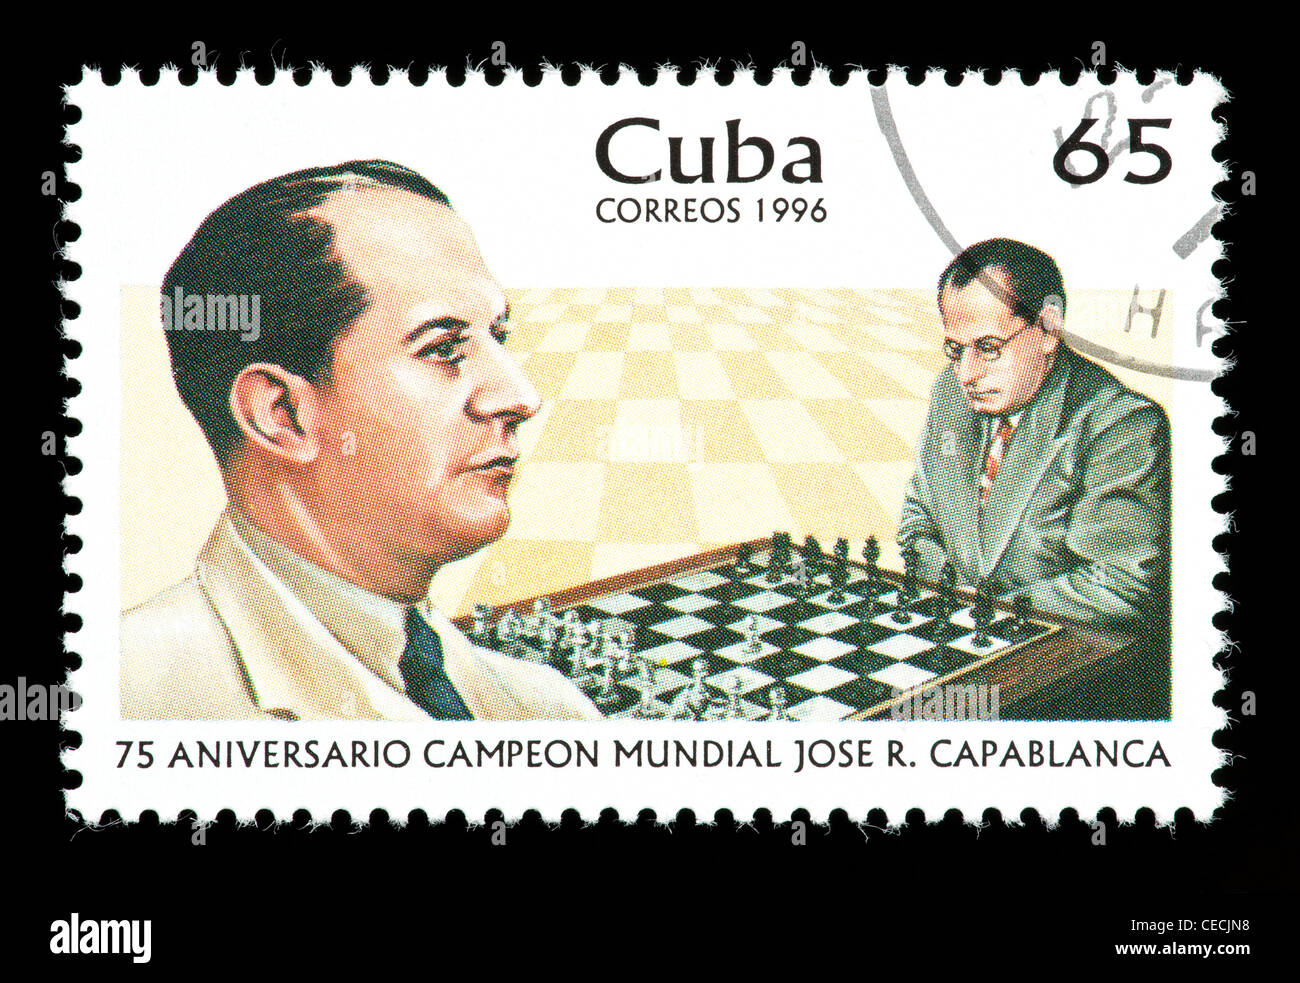 Postage stamp from Cuba depicting Jose Capablanca, former world chess  champion Stock Photo - Alamy